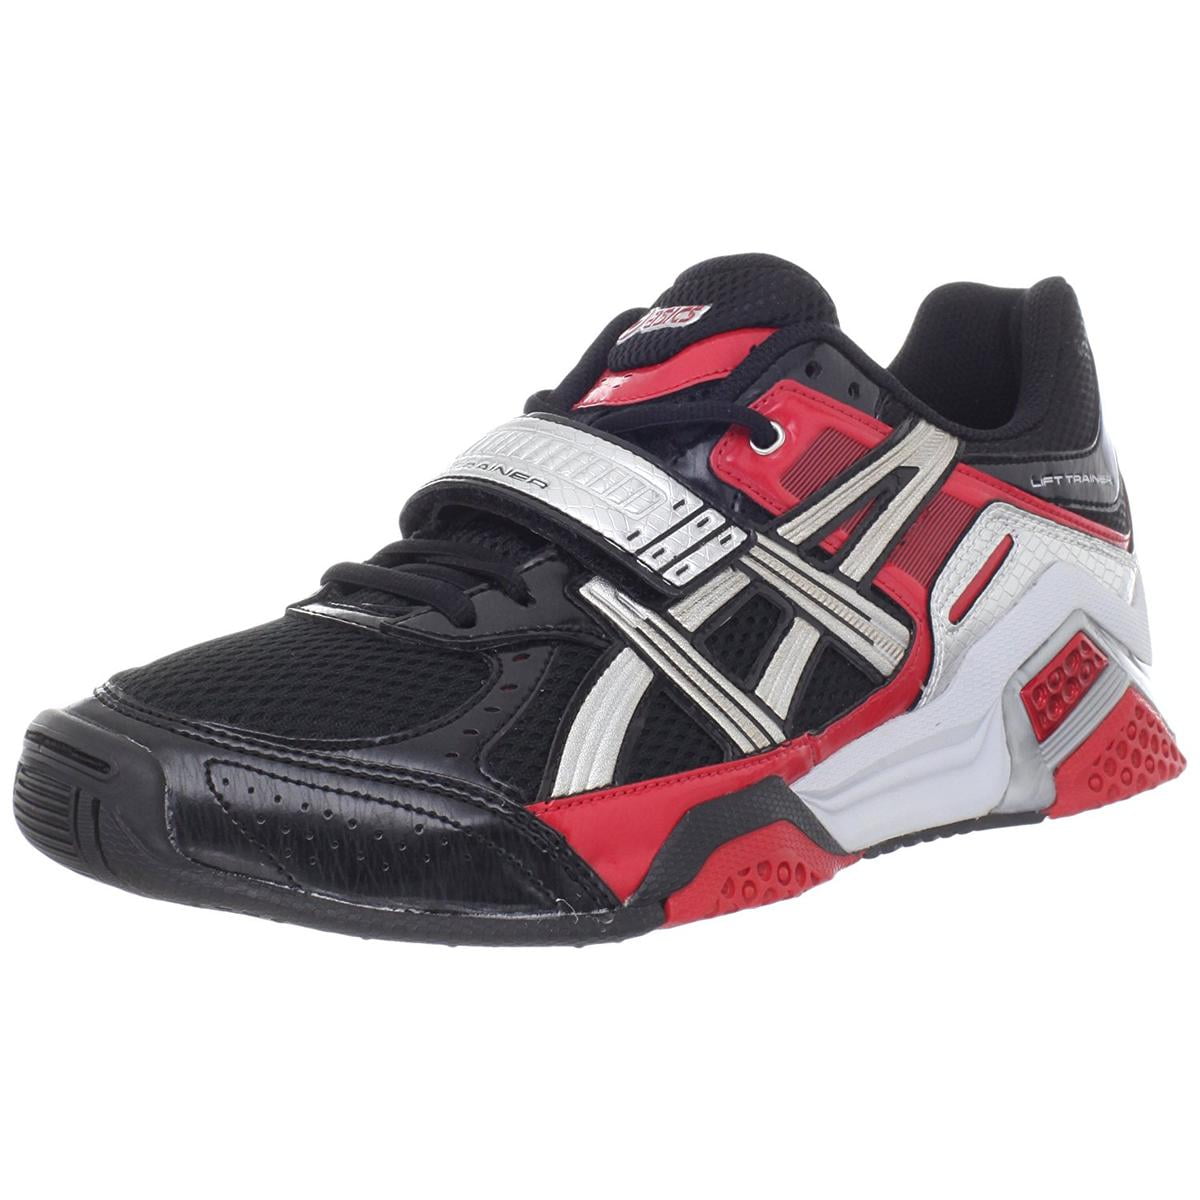 ASICS Lift Trainer Mens Black/Silver/ R Sneakers 